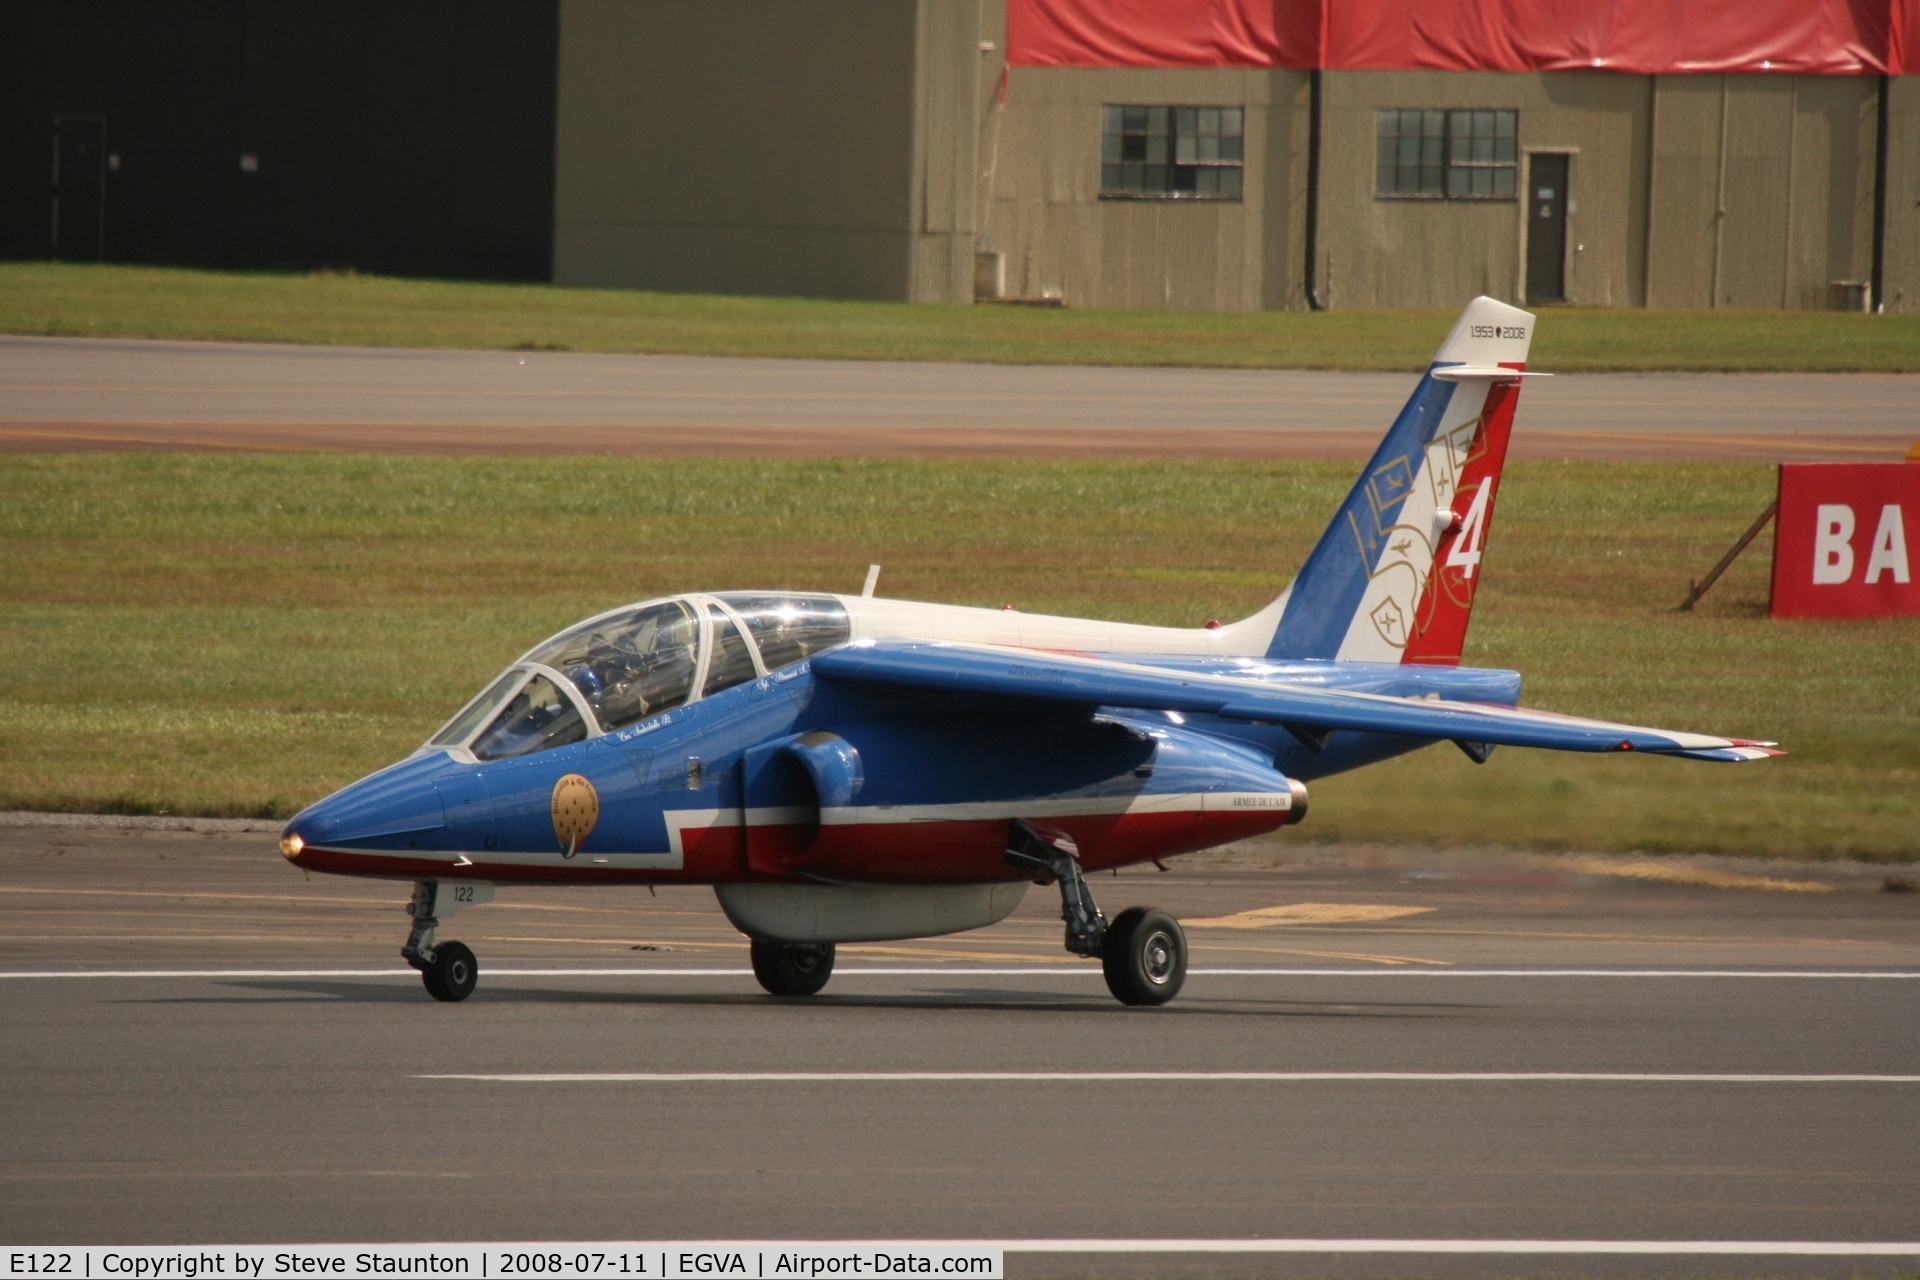 E122, Dassault-Dornier Alpha Jet E C/N E122, Taken at the Royal International Air Tattoo 2008 during arrivals and departures (show days cancelled due to bad weather)